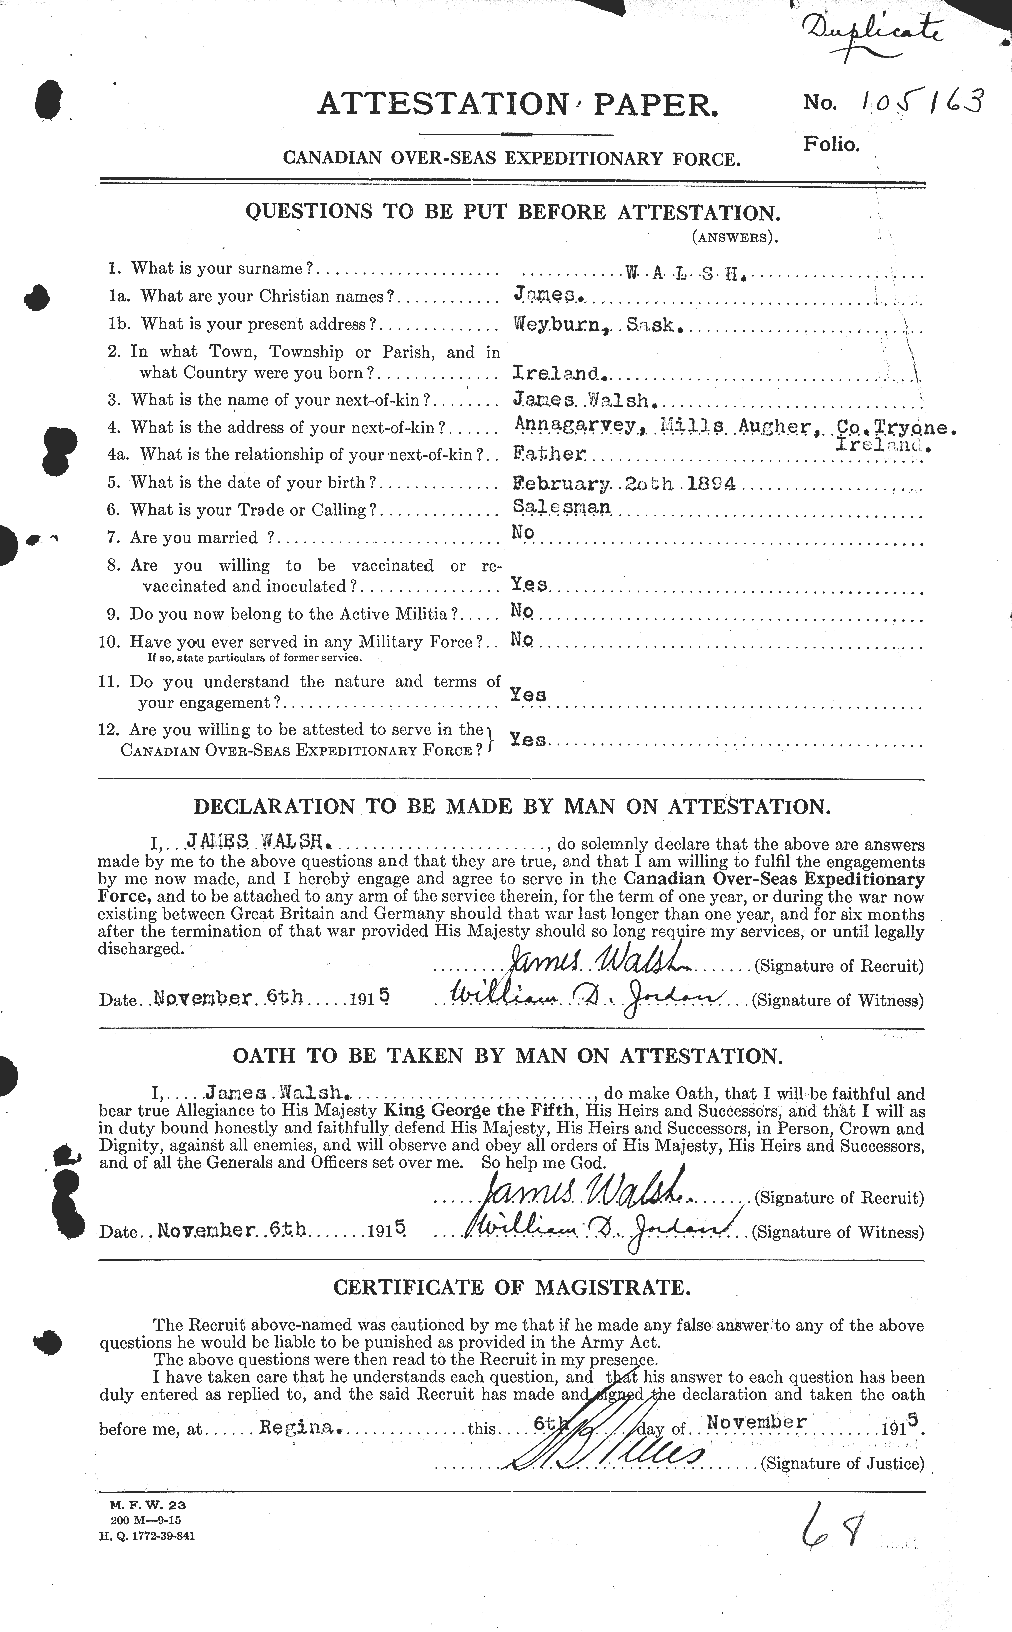 Personnel Records of the First World War - CEF 653289a